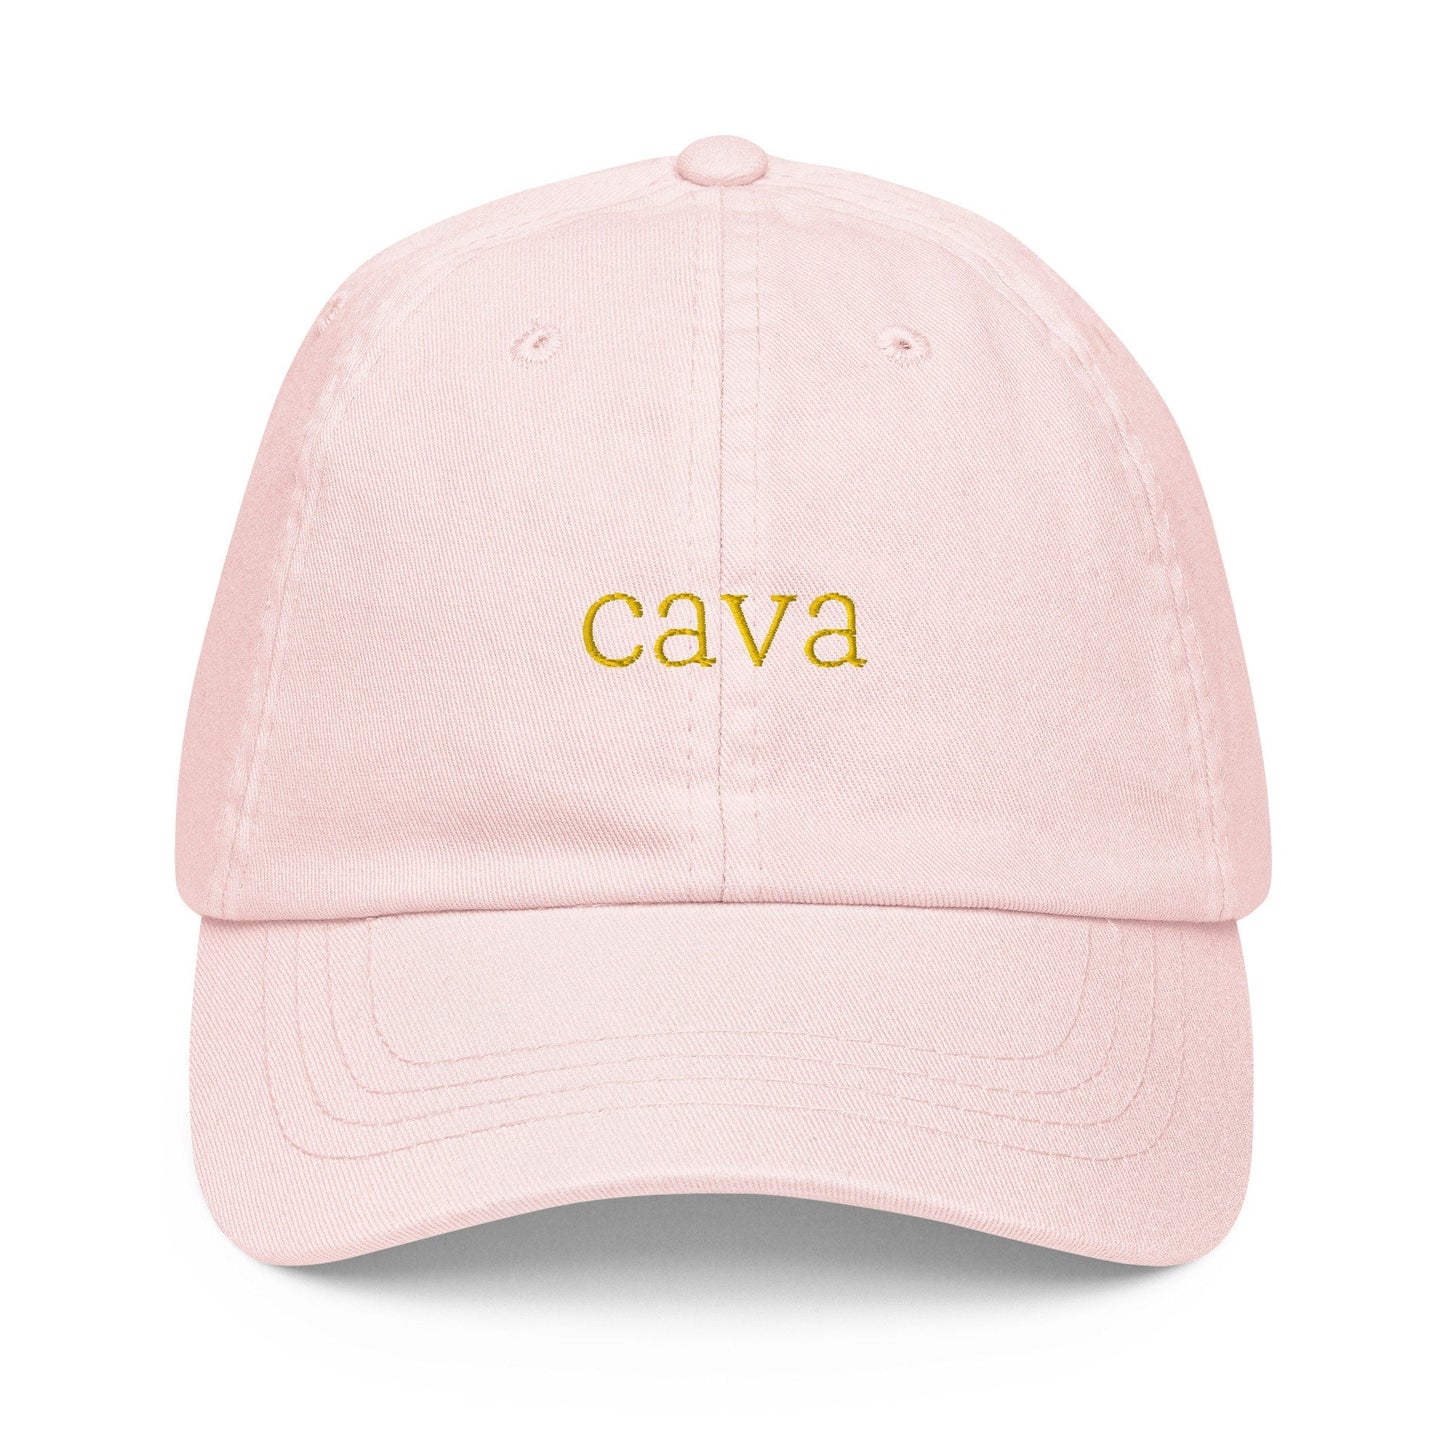 Cava Dad Hat - Gift for Spanish Wine Lovers - Pastel Cotton Embroidered Cap - Evilwater Originals